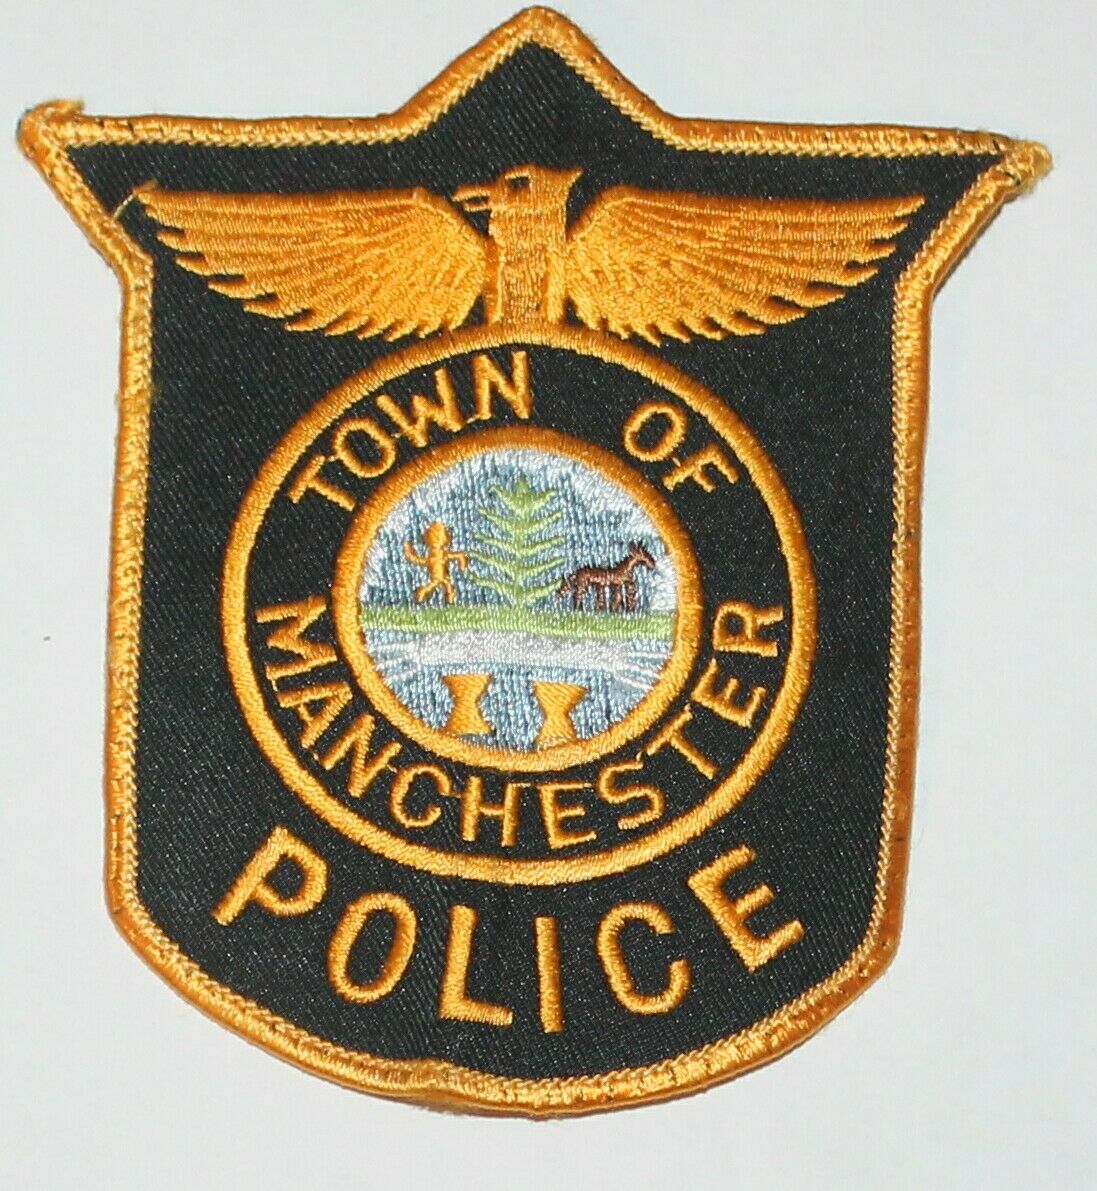 TOWN OF MANCHESTER POLICE Vermont VT PD Used Worn patch